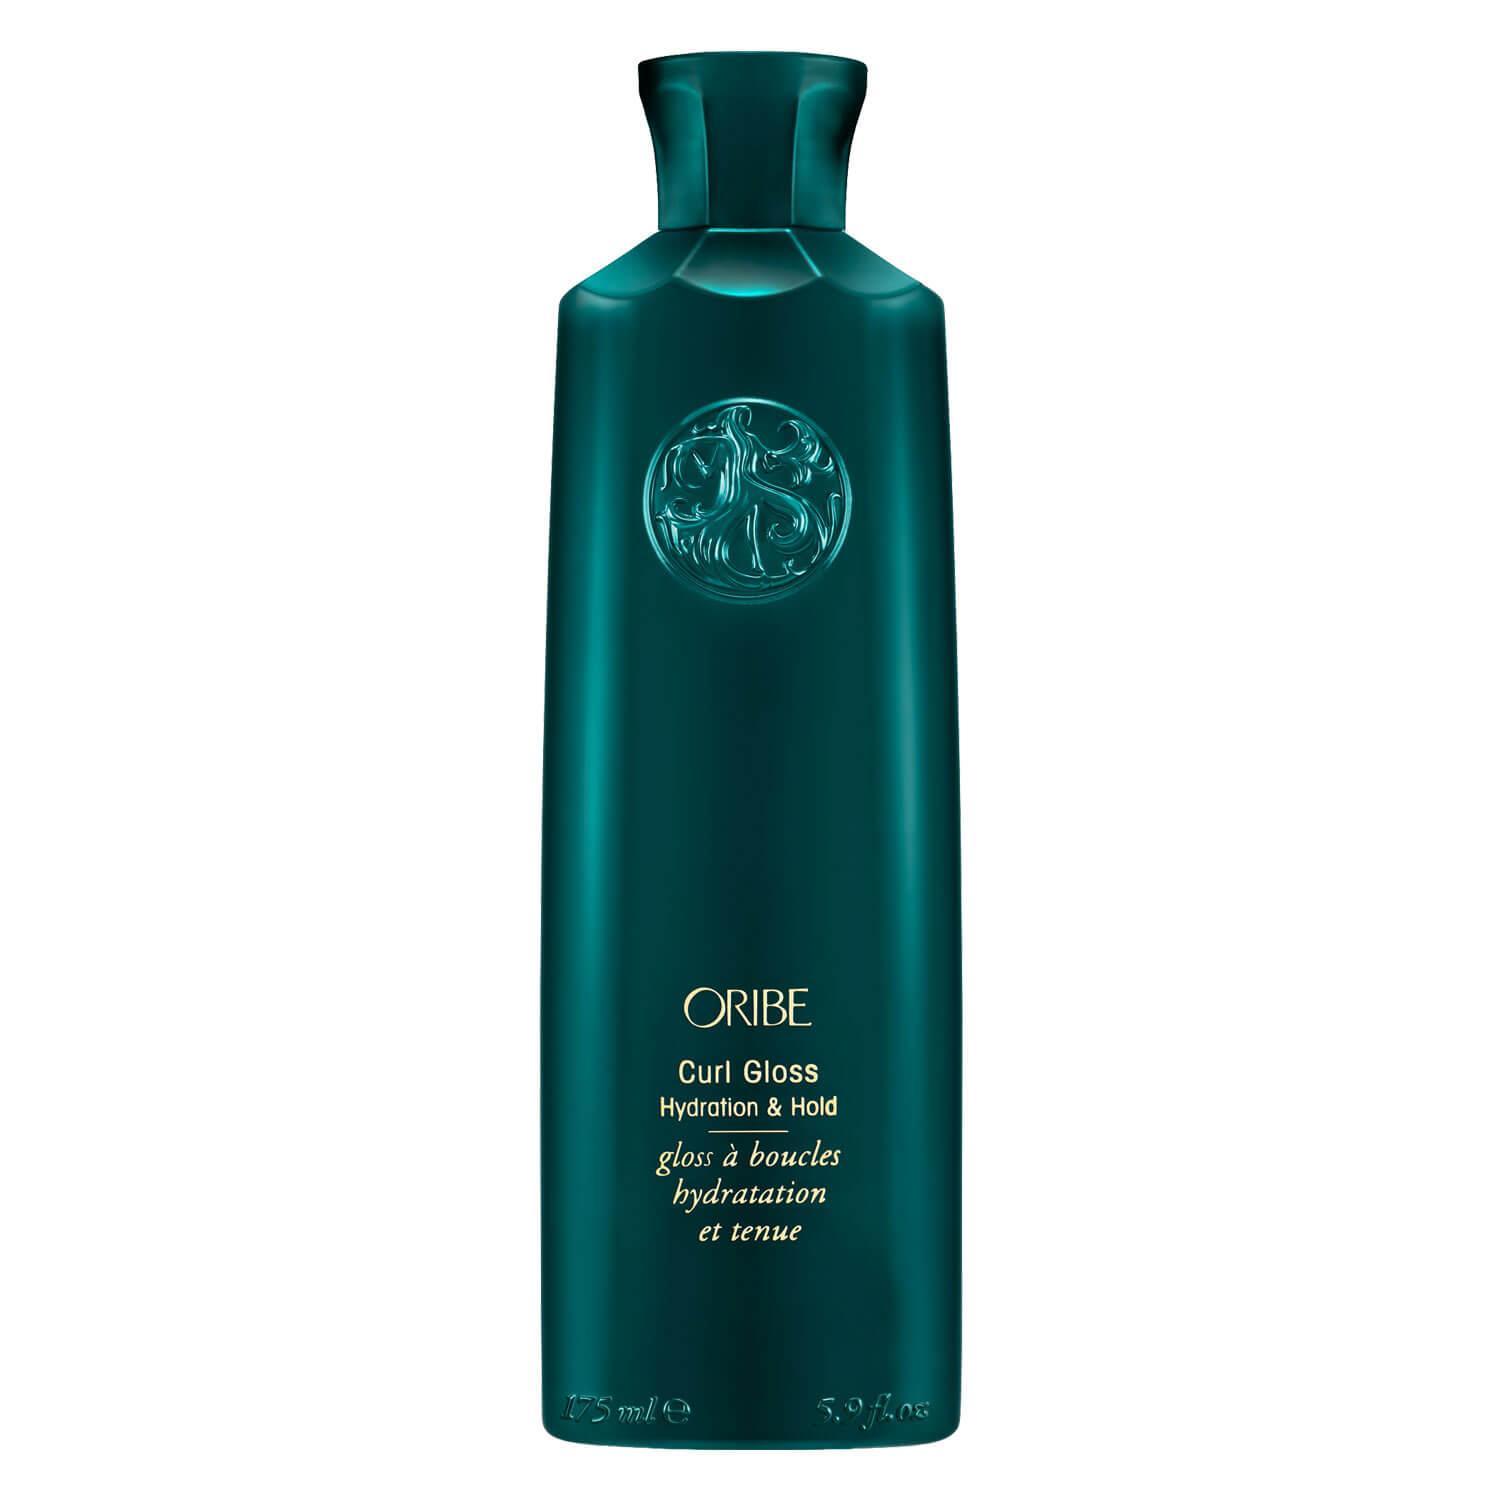 Oribe Style - Curl Gloss Hydration & Hold